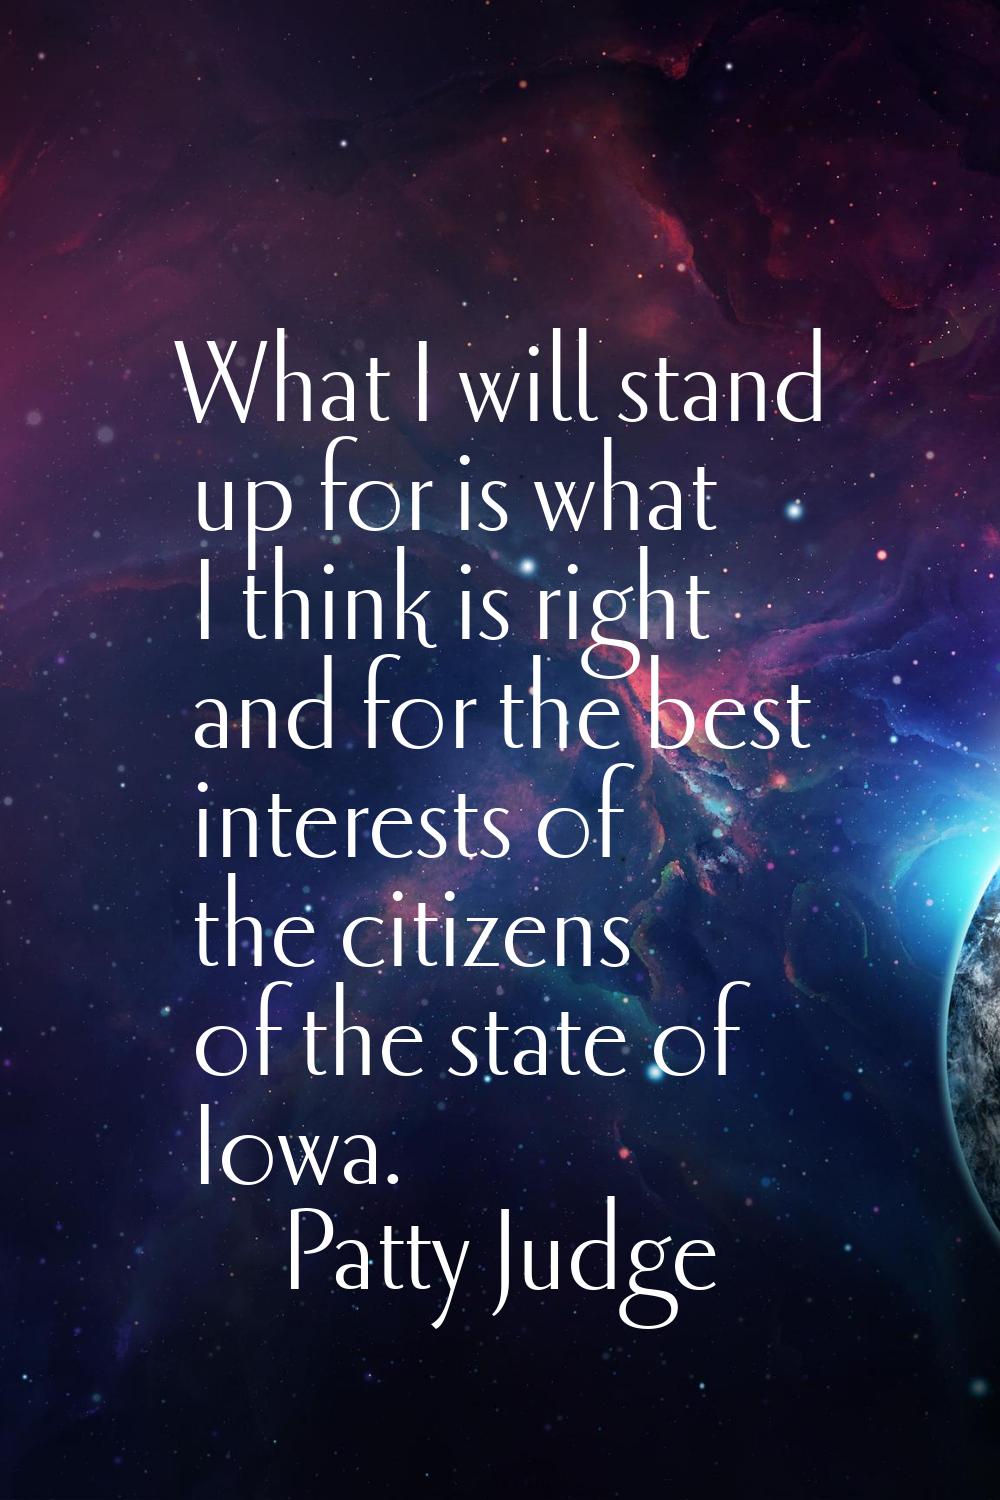 What I will stand up for is what I think is right and for the best interests of the citizens of the